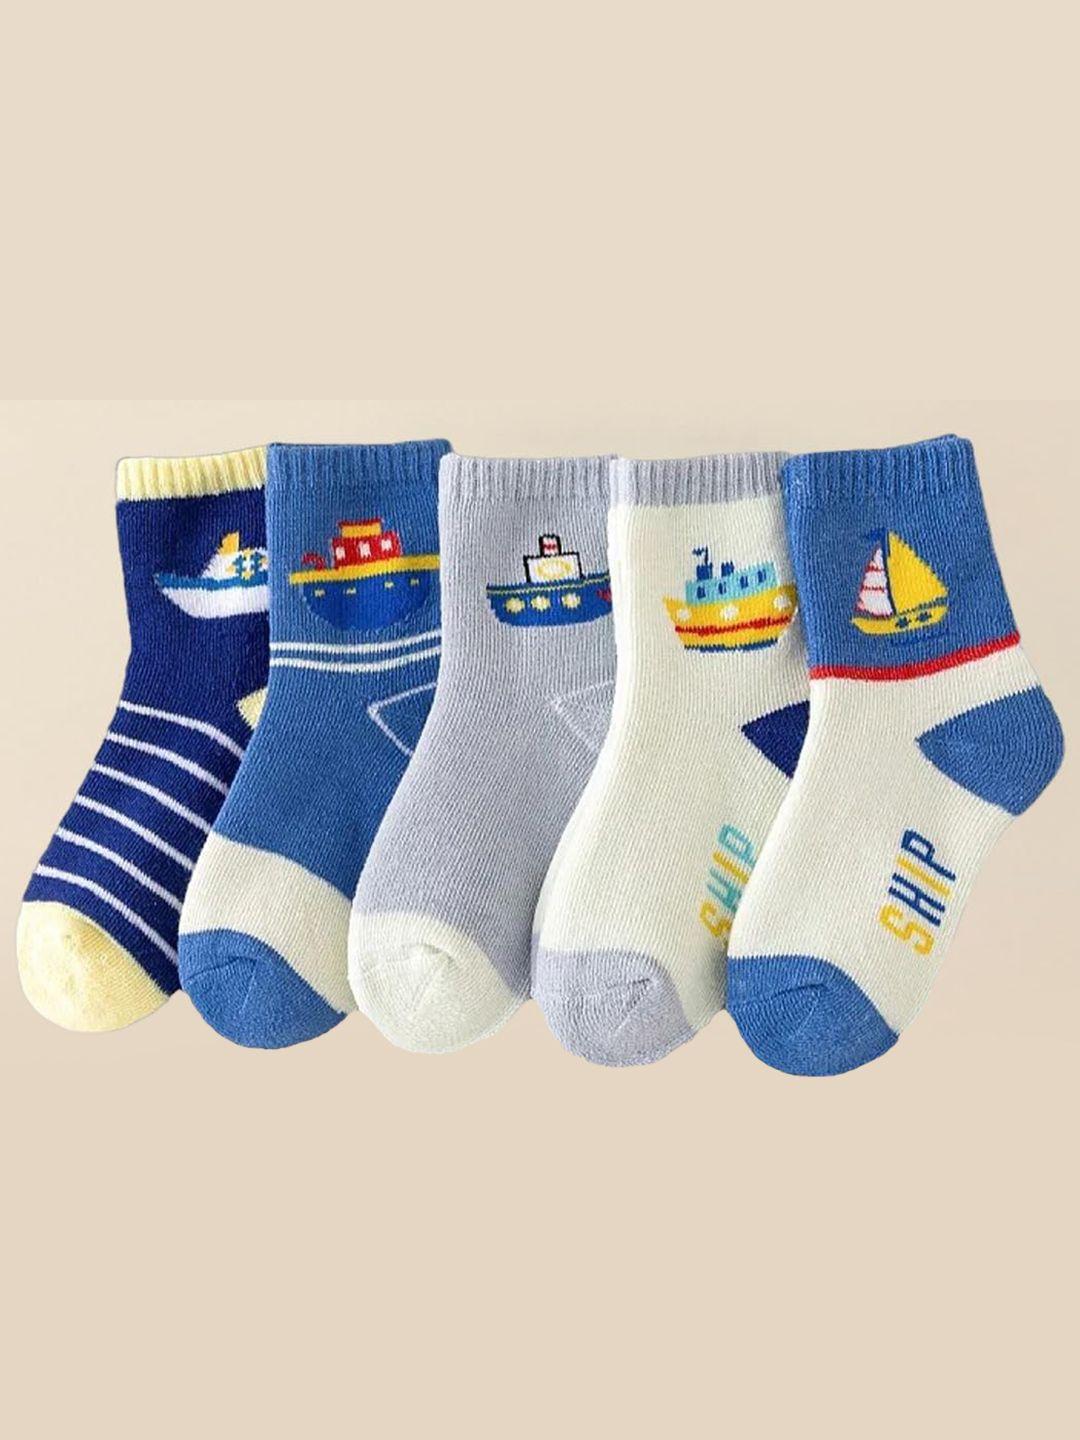 syga infants pack of 5 patterned ankle-length pure cotton socks